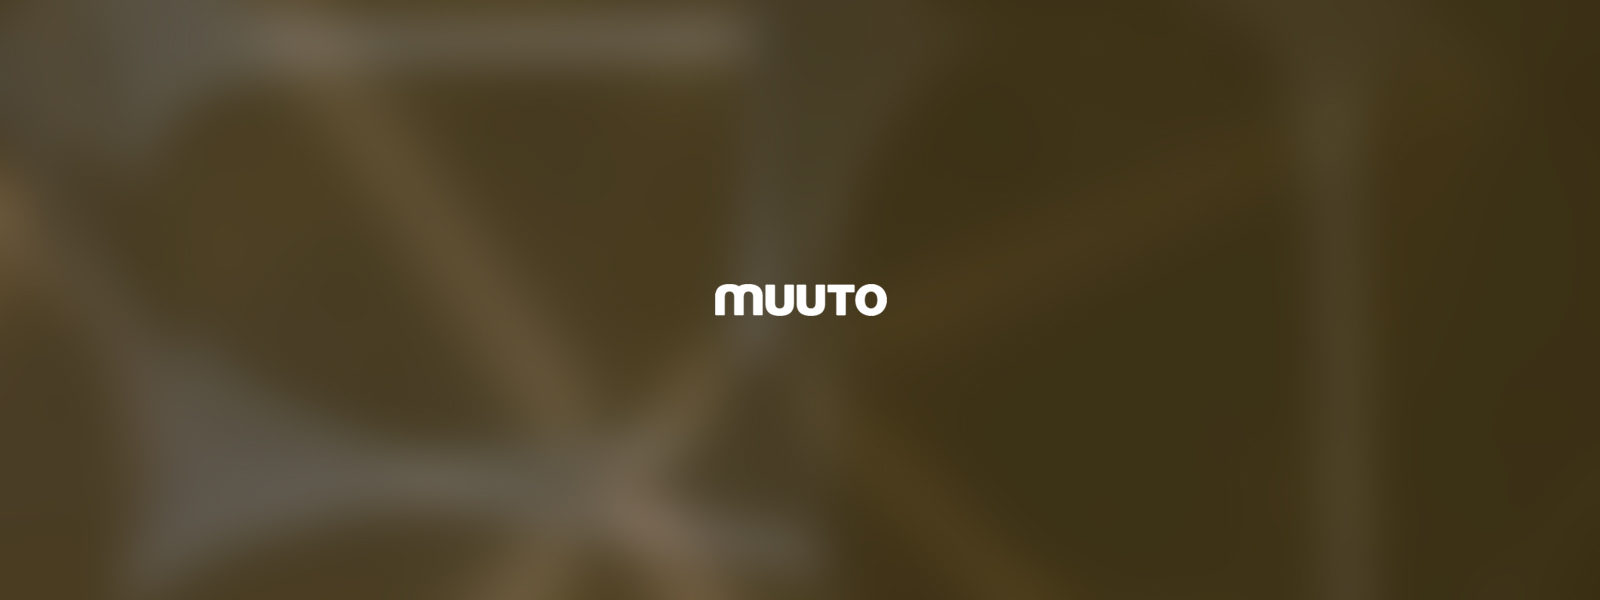 Muuto: A New Perspective